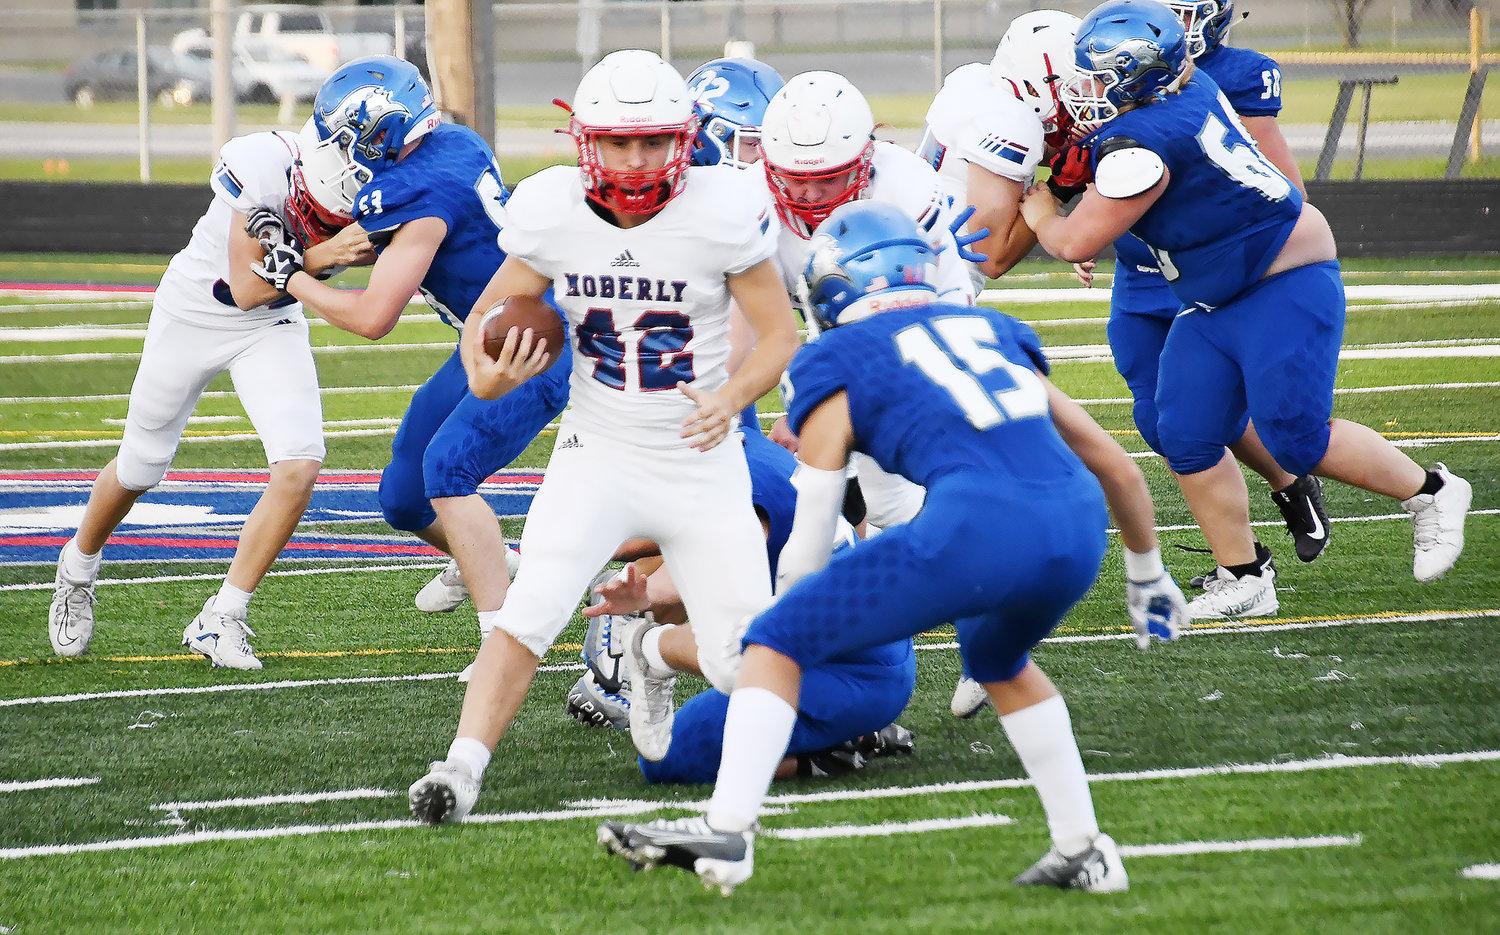 Moberly's Carter Grant breaks into the clear, earning a first down for the Spartans on this play.